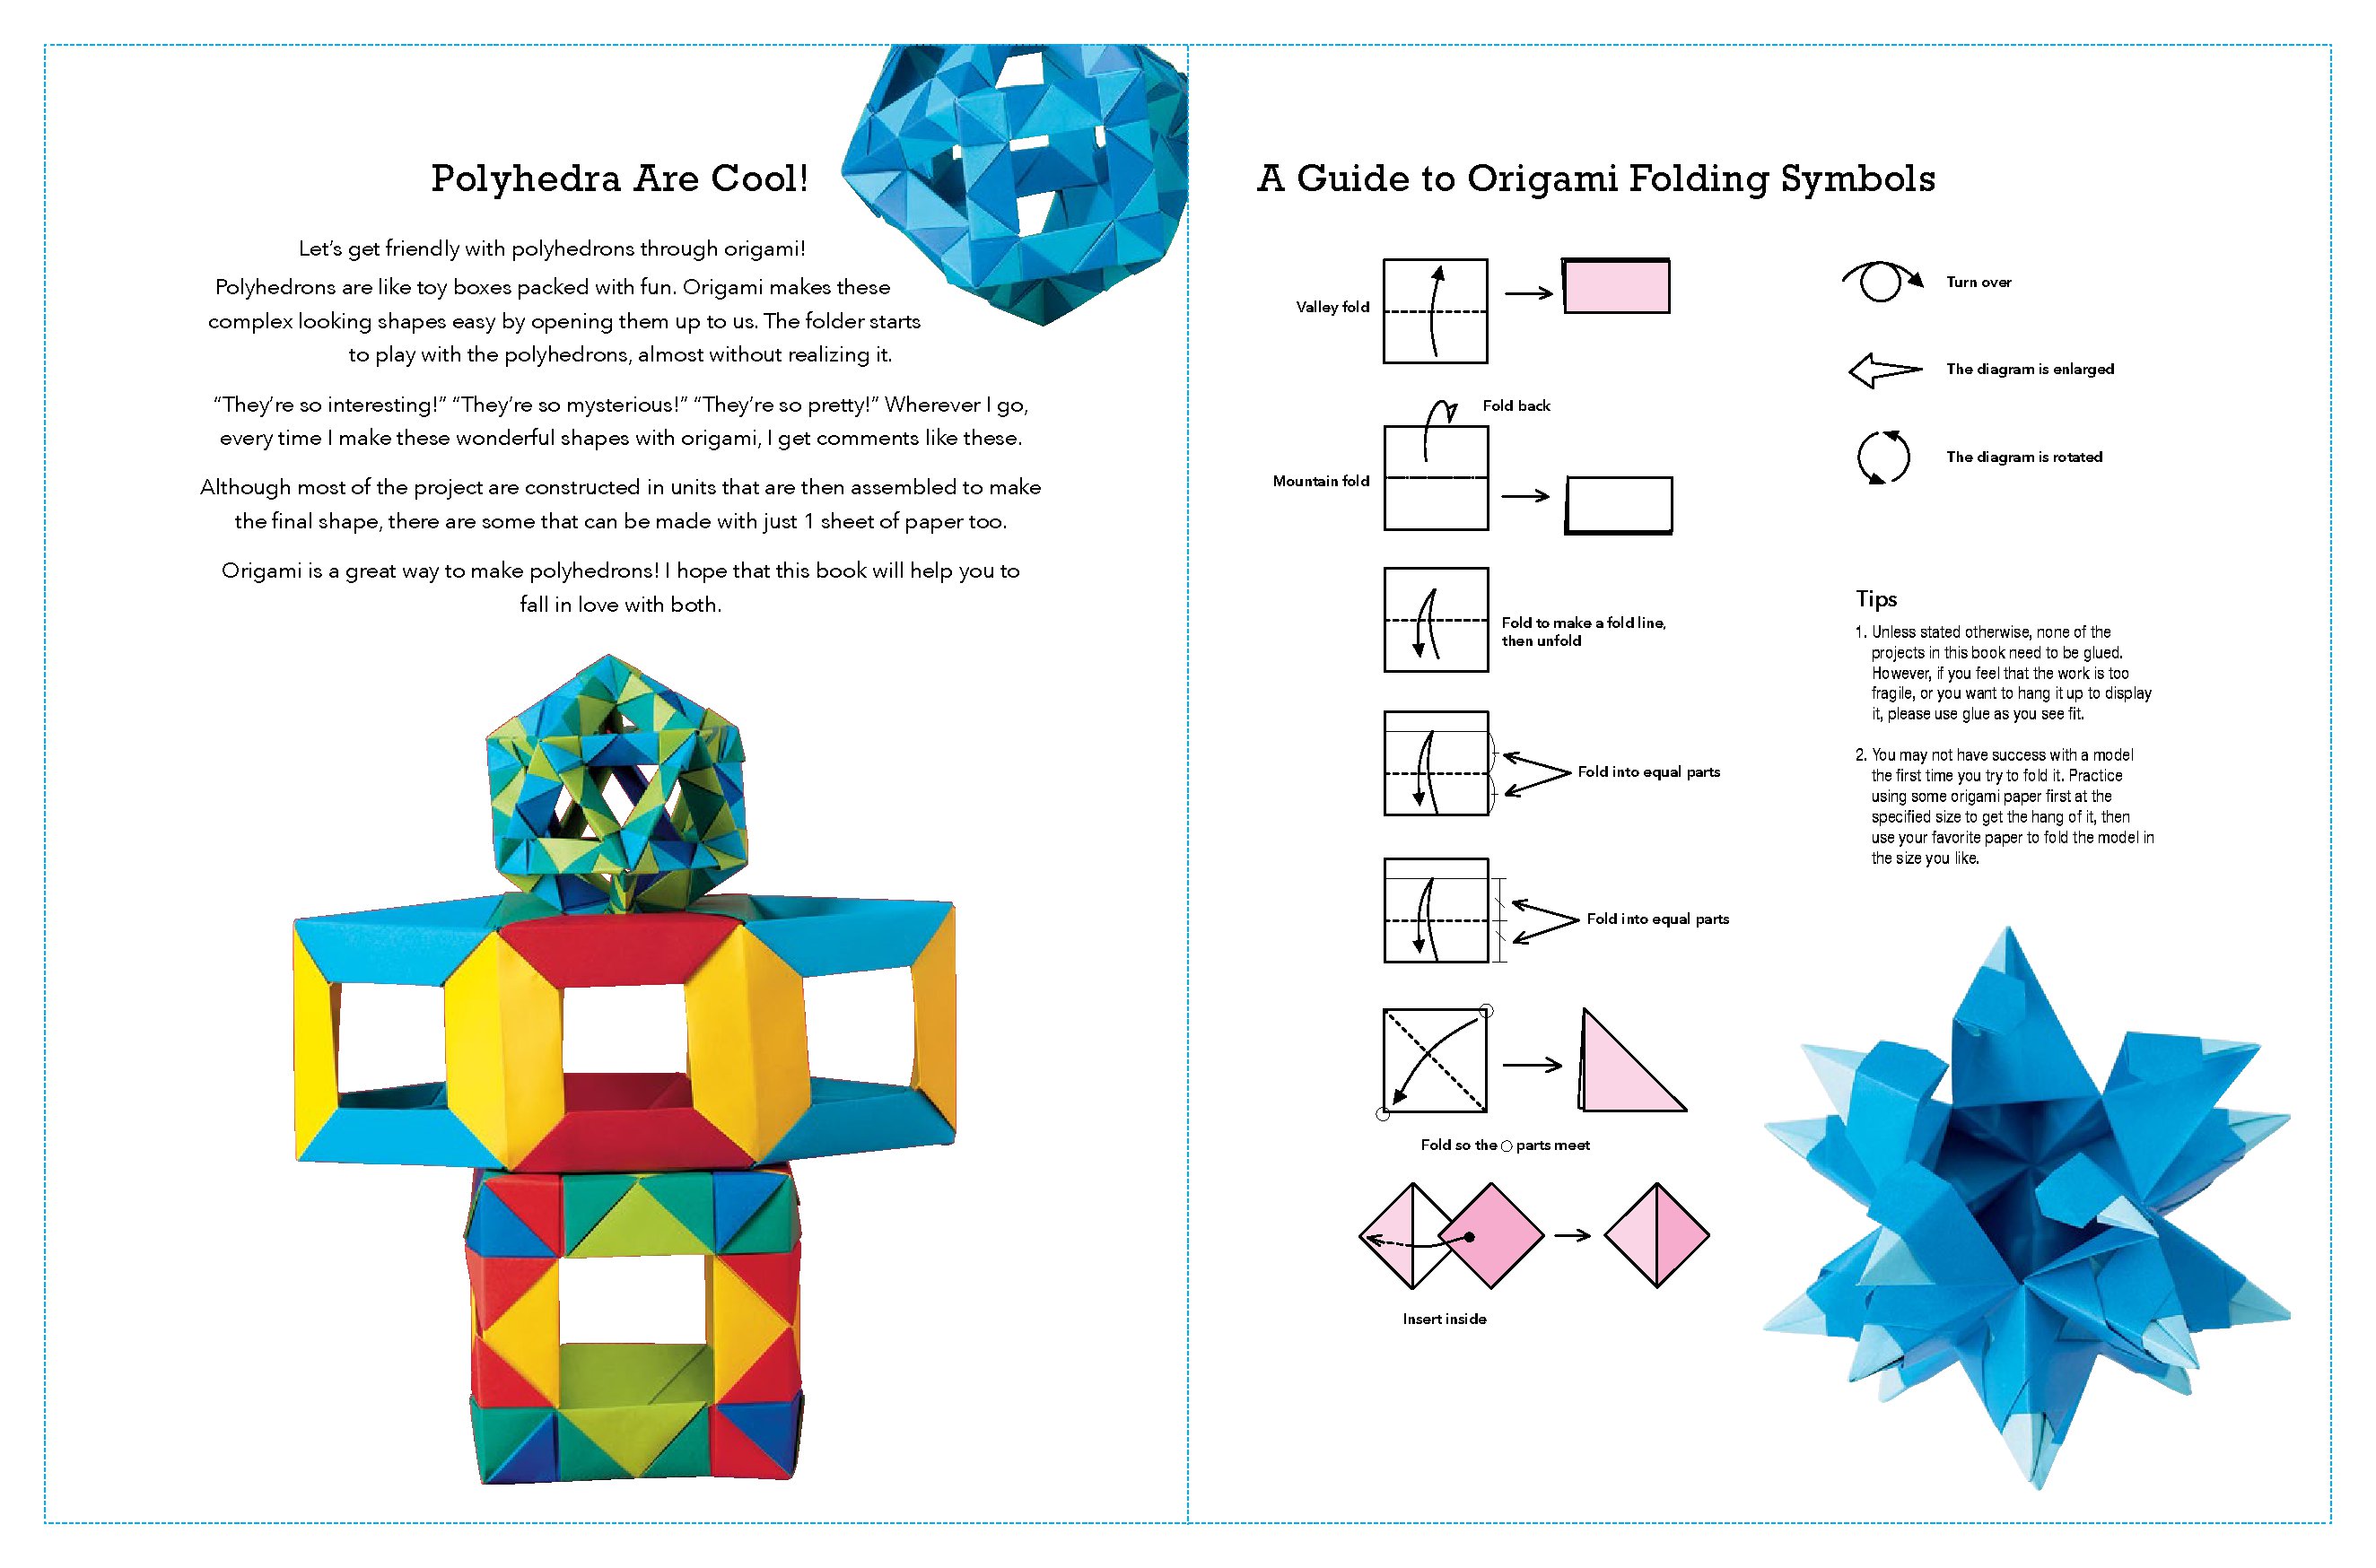 The Complete Book of Origami Polyhedra